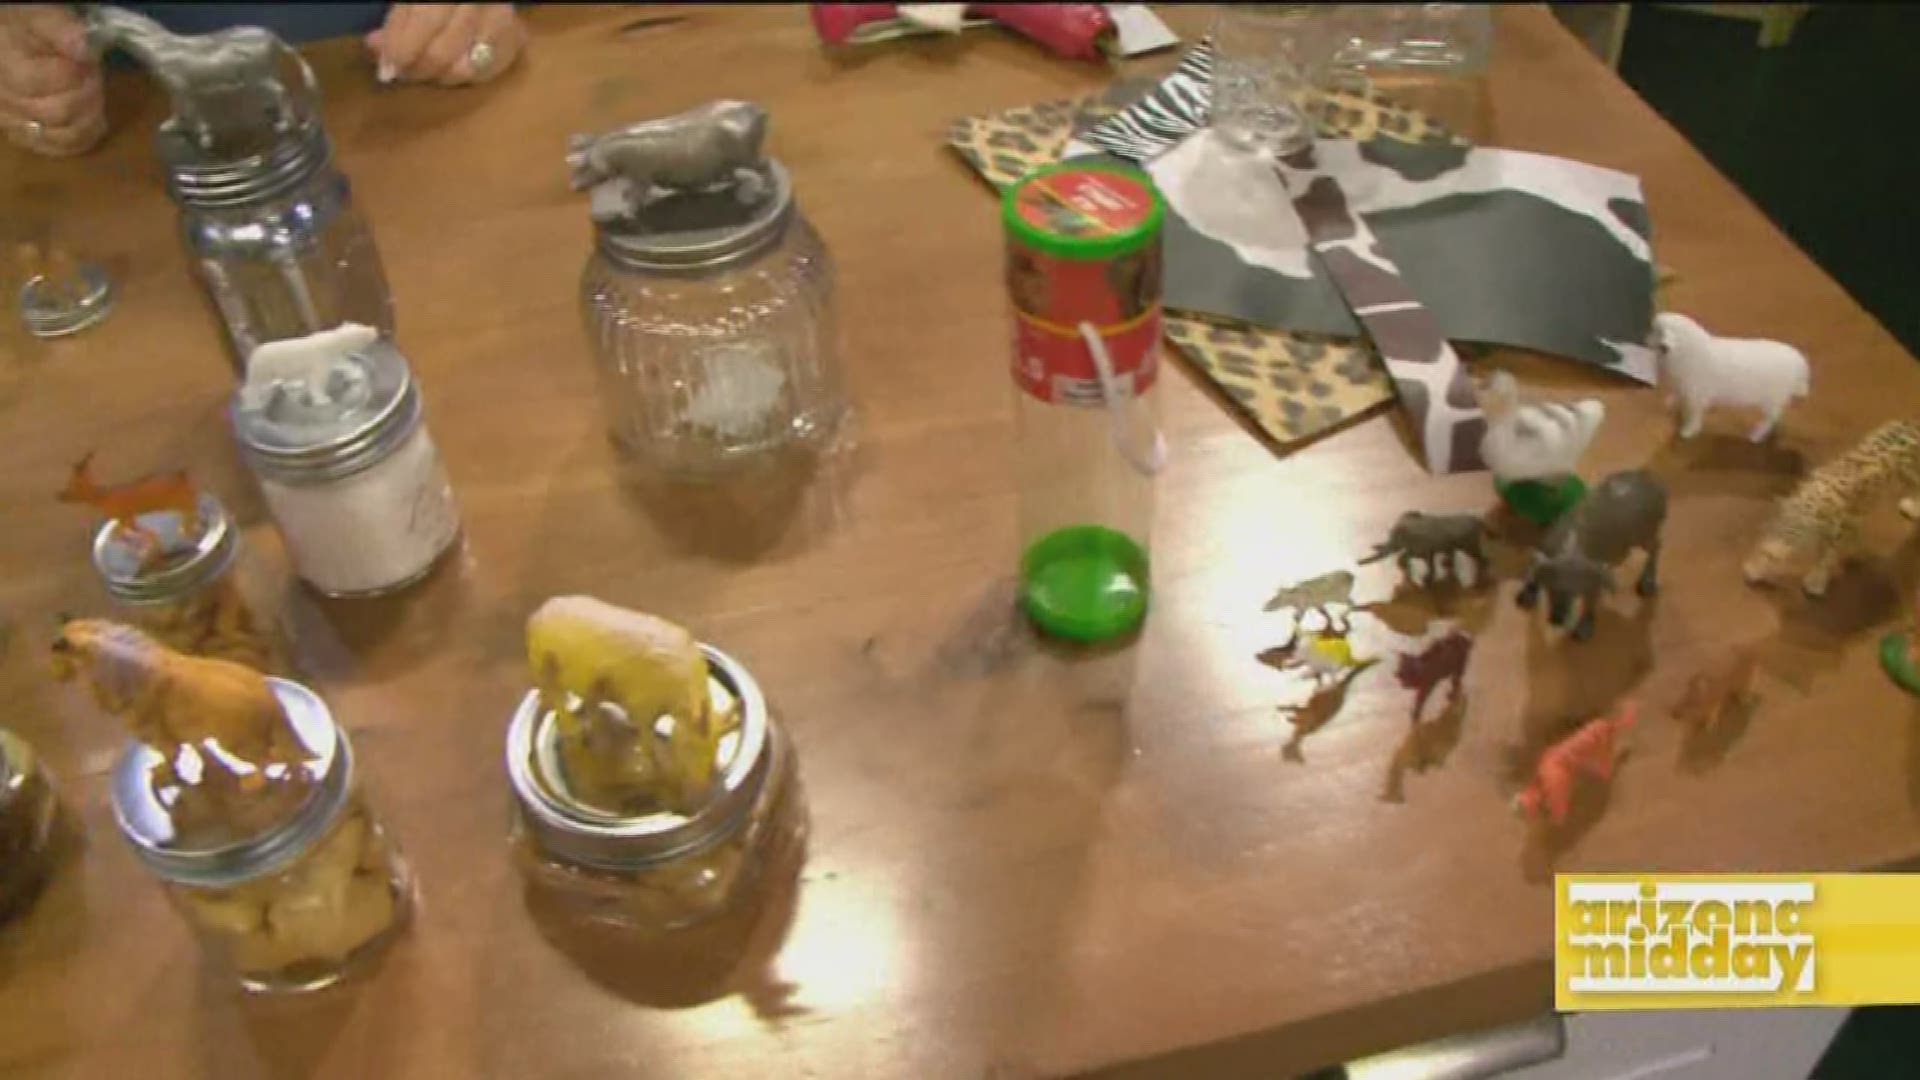 Jan shows us how to make your own cute animal toppers for your sugars, spices and more!